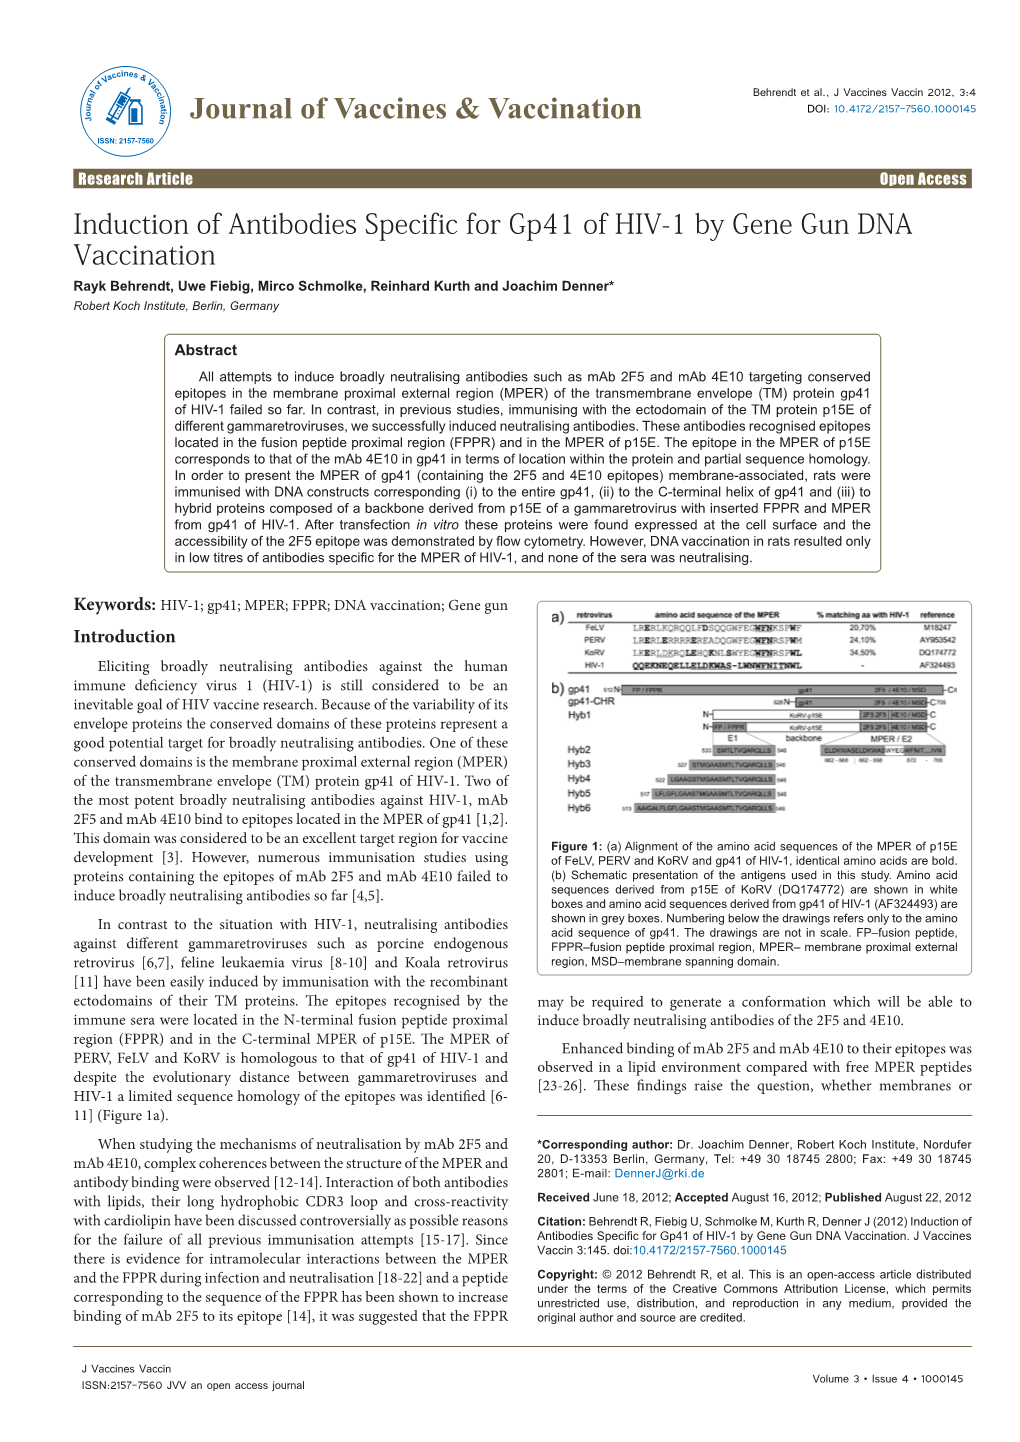 Induction of Antibodies Specific for Gp41 of HIV-1 by Gene Gun DNA